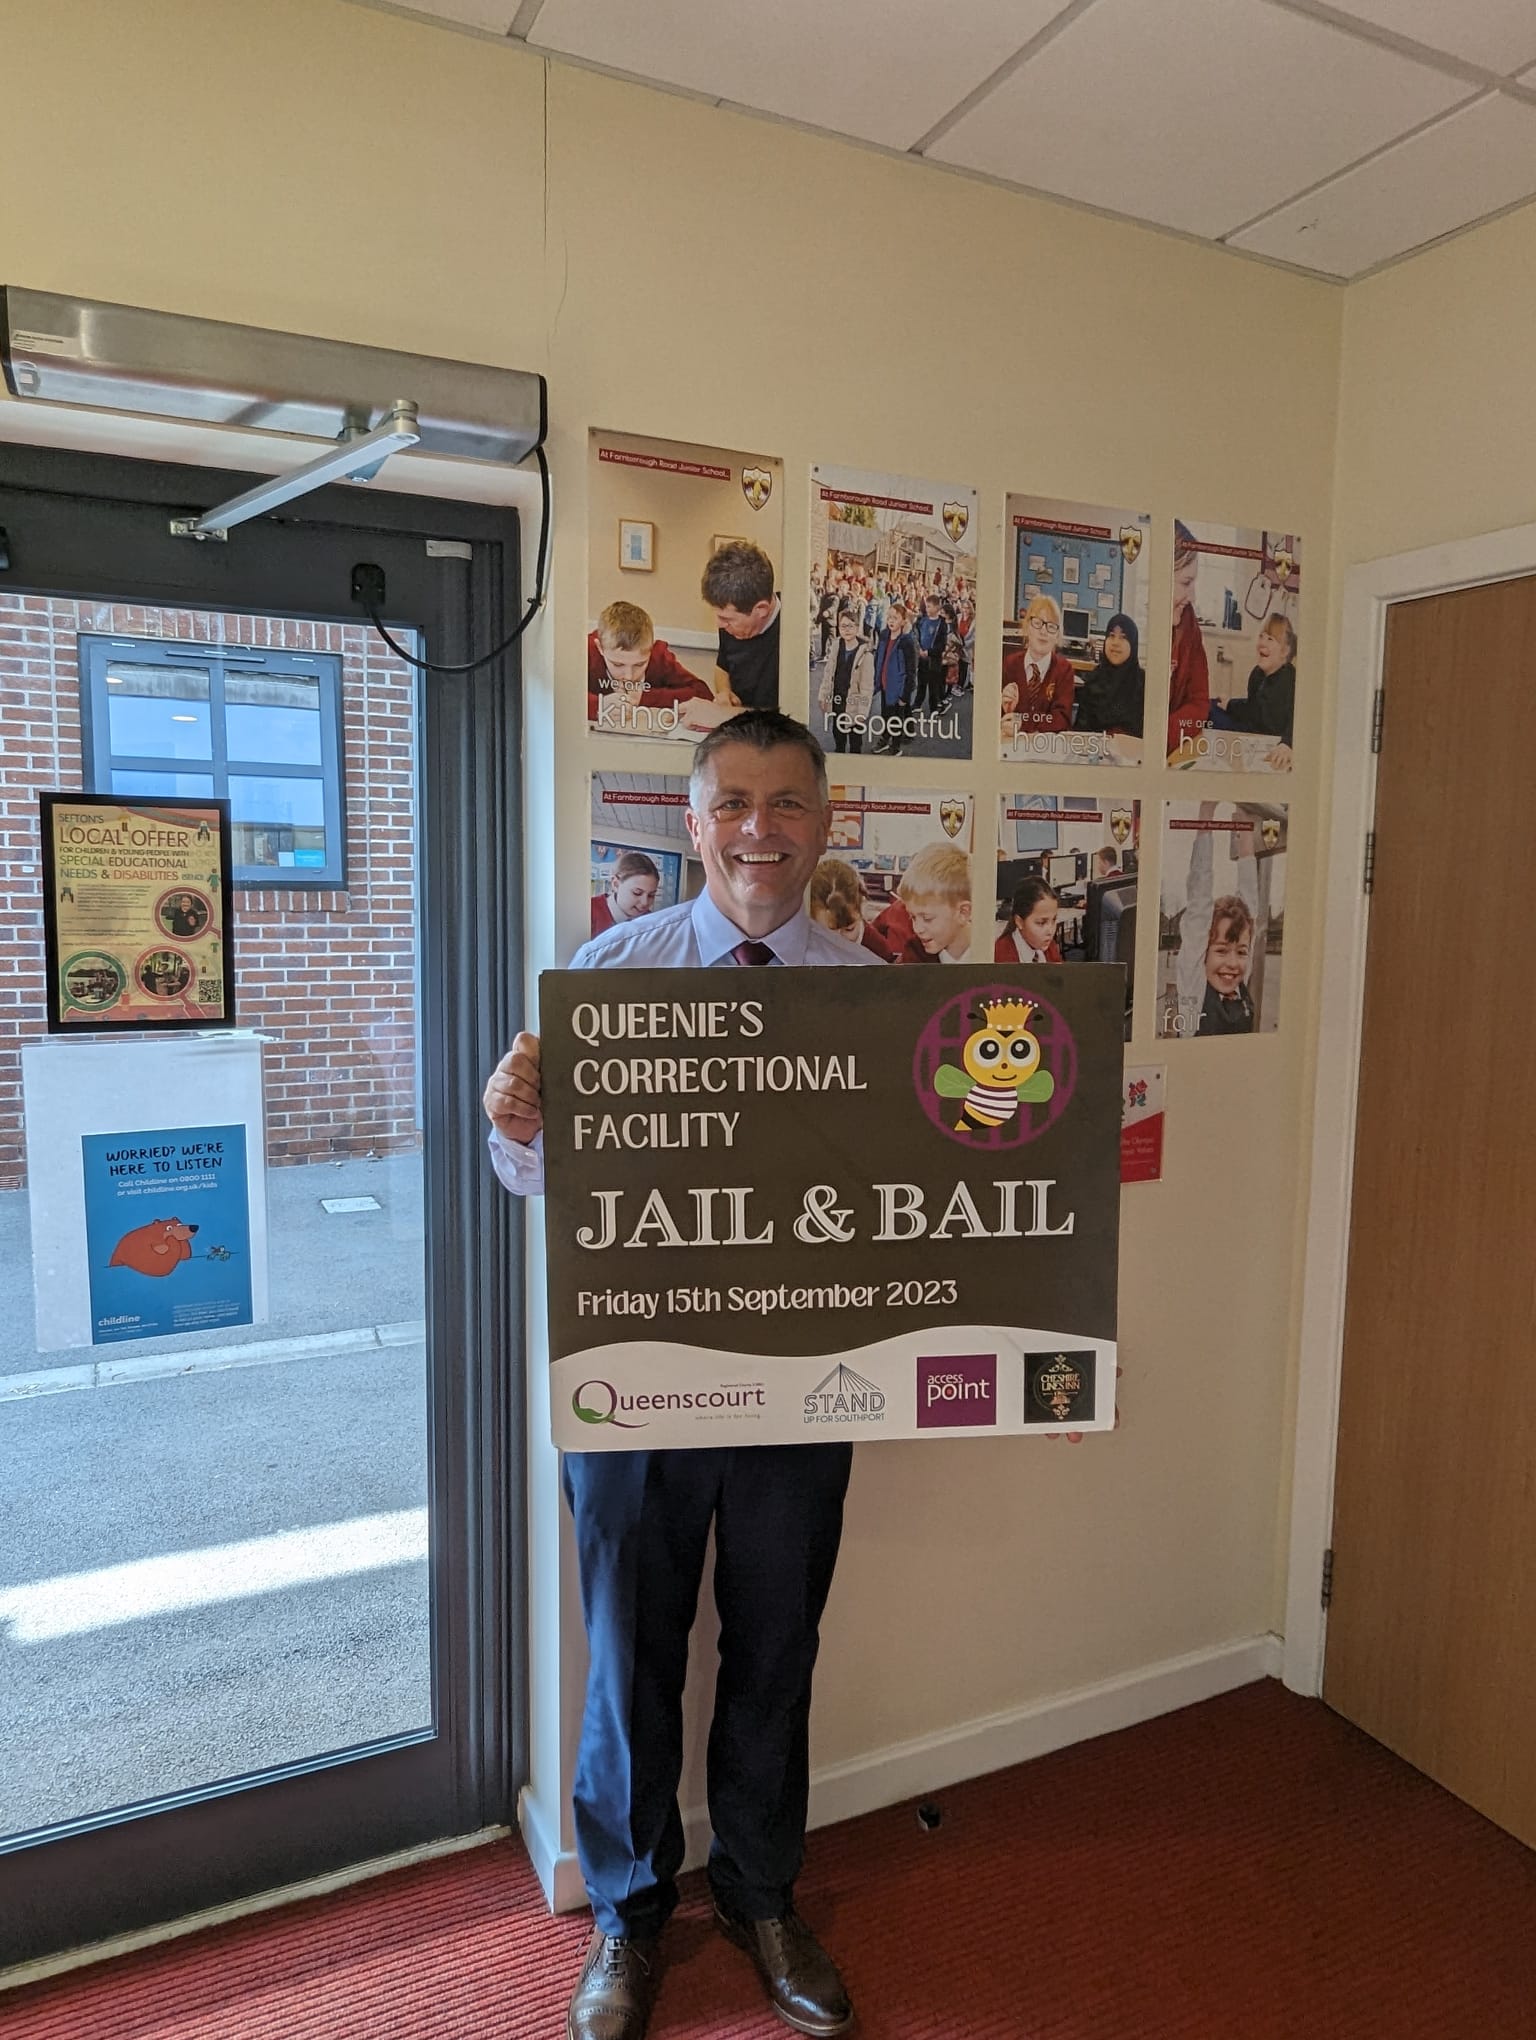 Adrian Antell, the headteacher of Farnborough Road Junior School in Birkdale in Southport, is taking part in the Jail and Bail fundraiser for Queenscourt Hospice